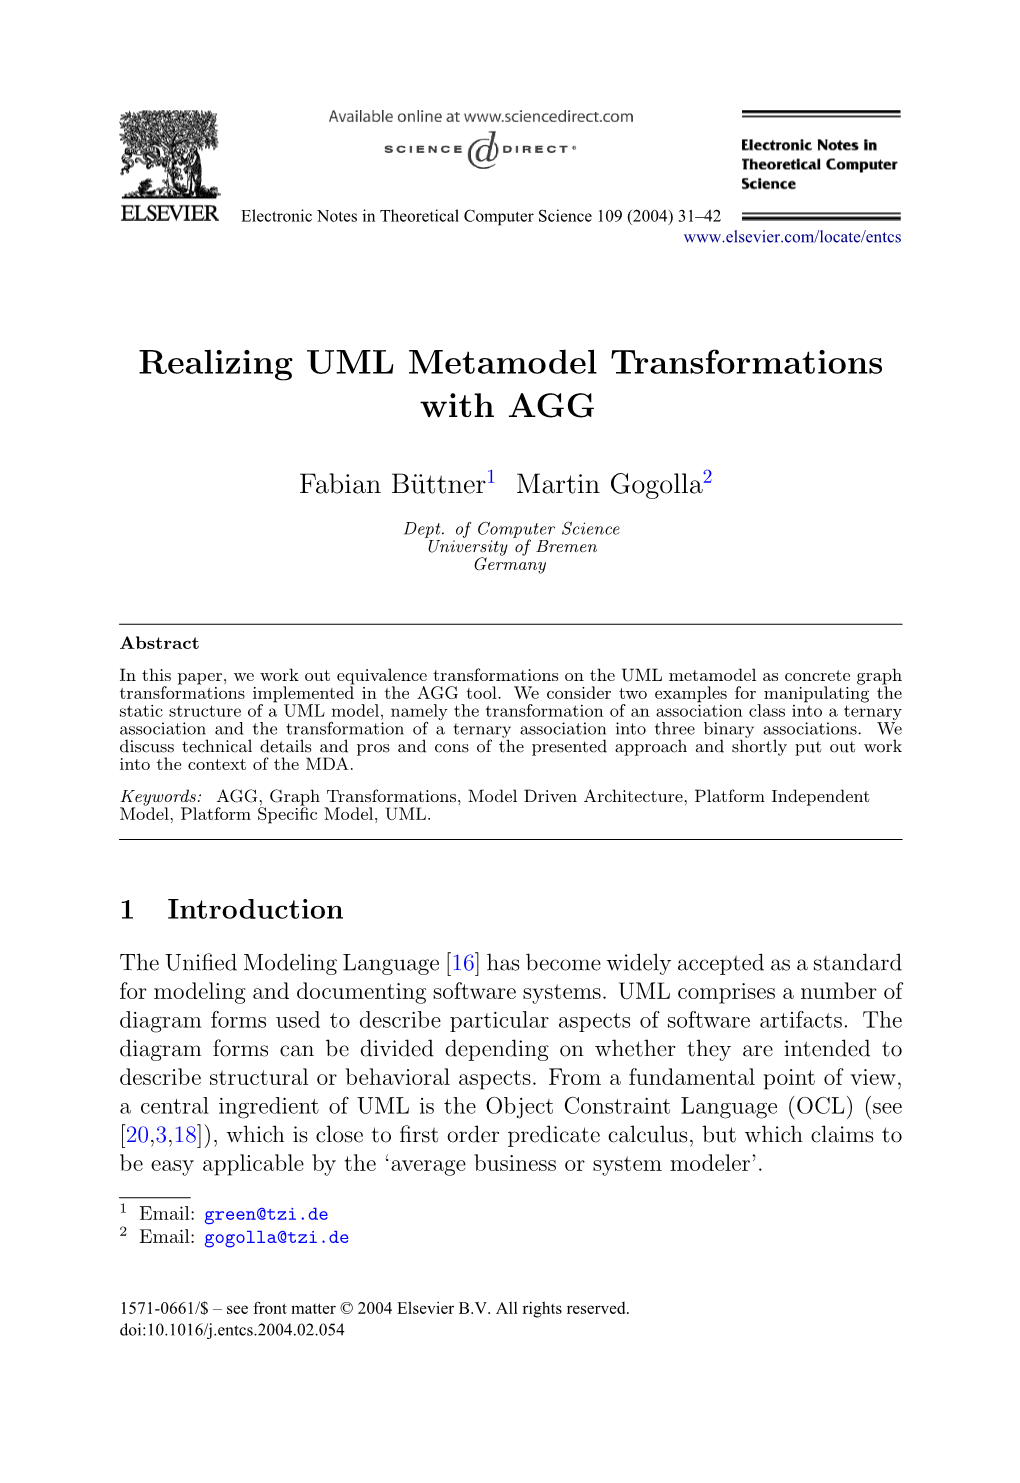 Realizing UML Metamodel Transformations with AGG